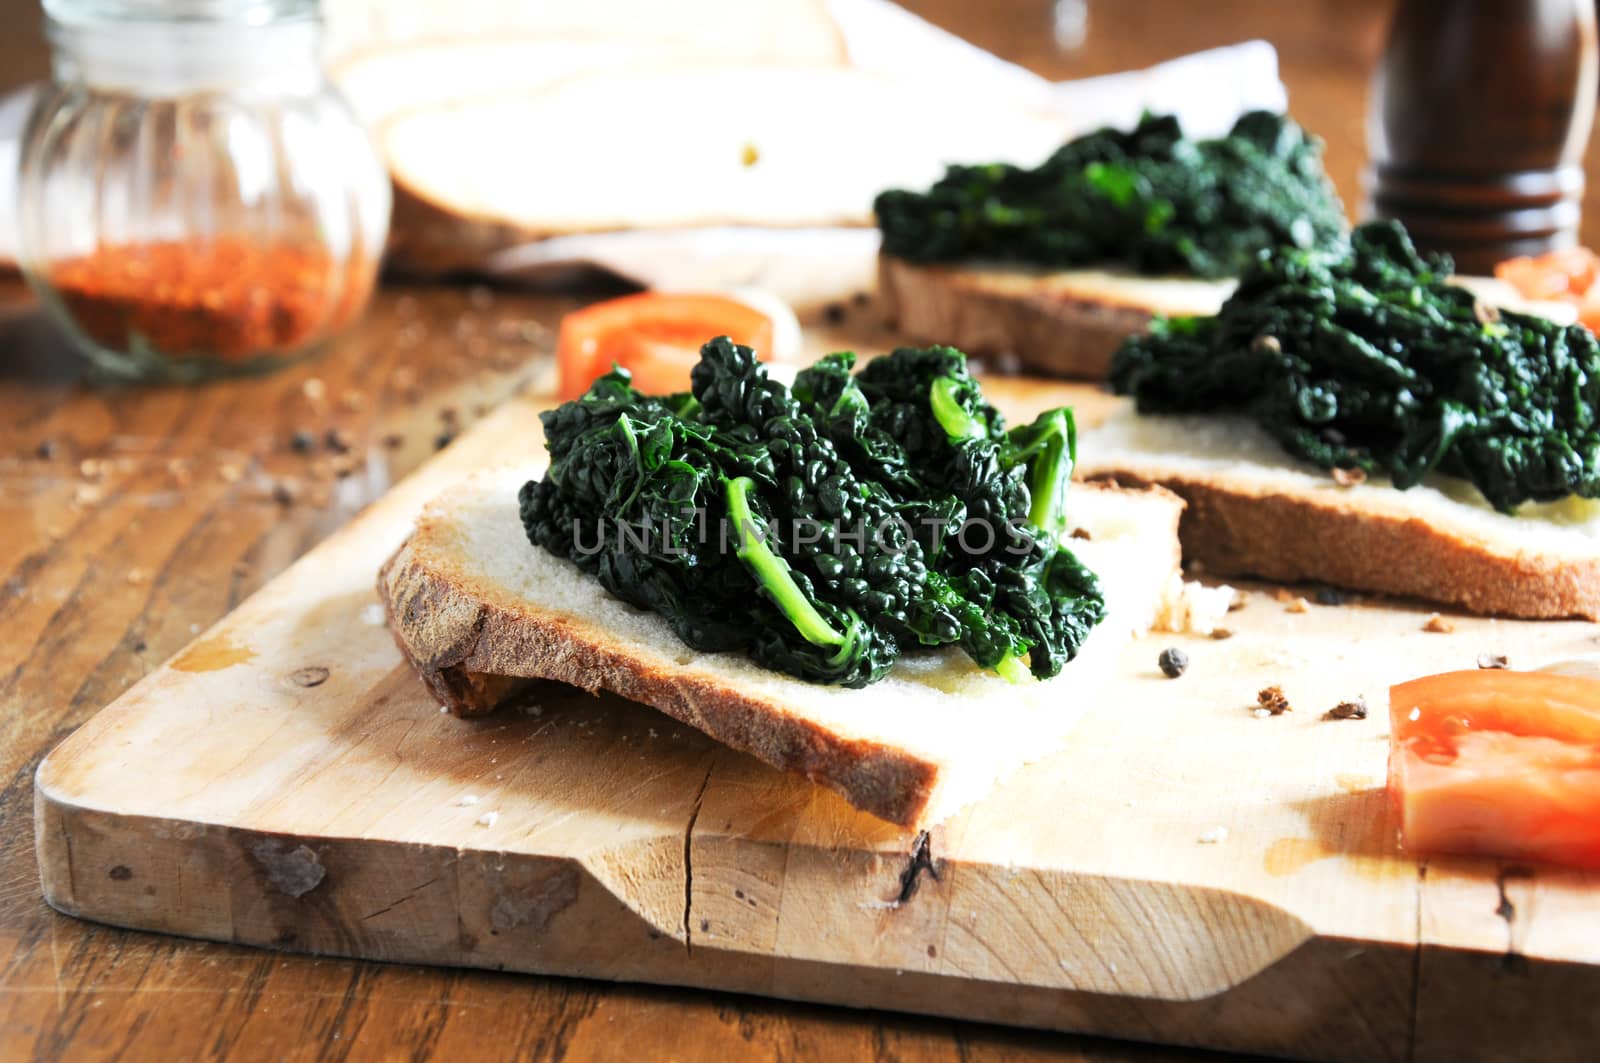 Canap� with black cabbage